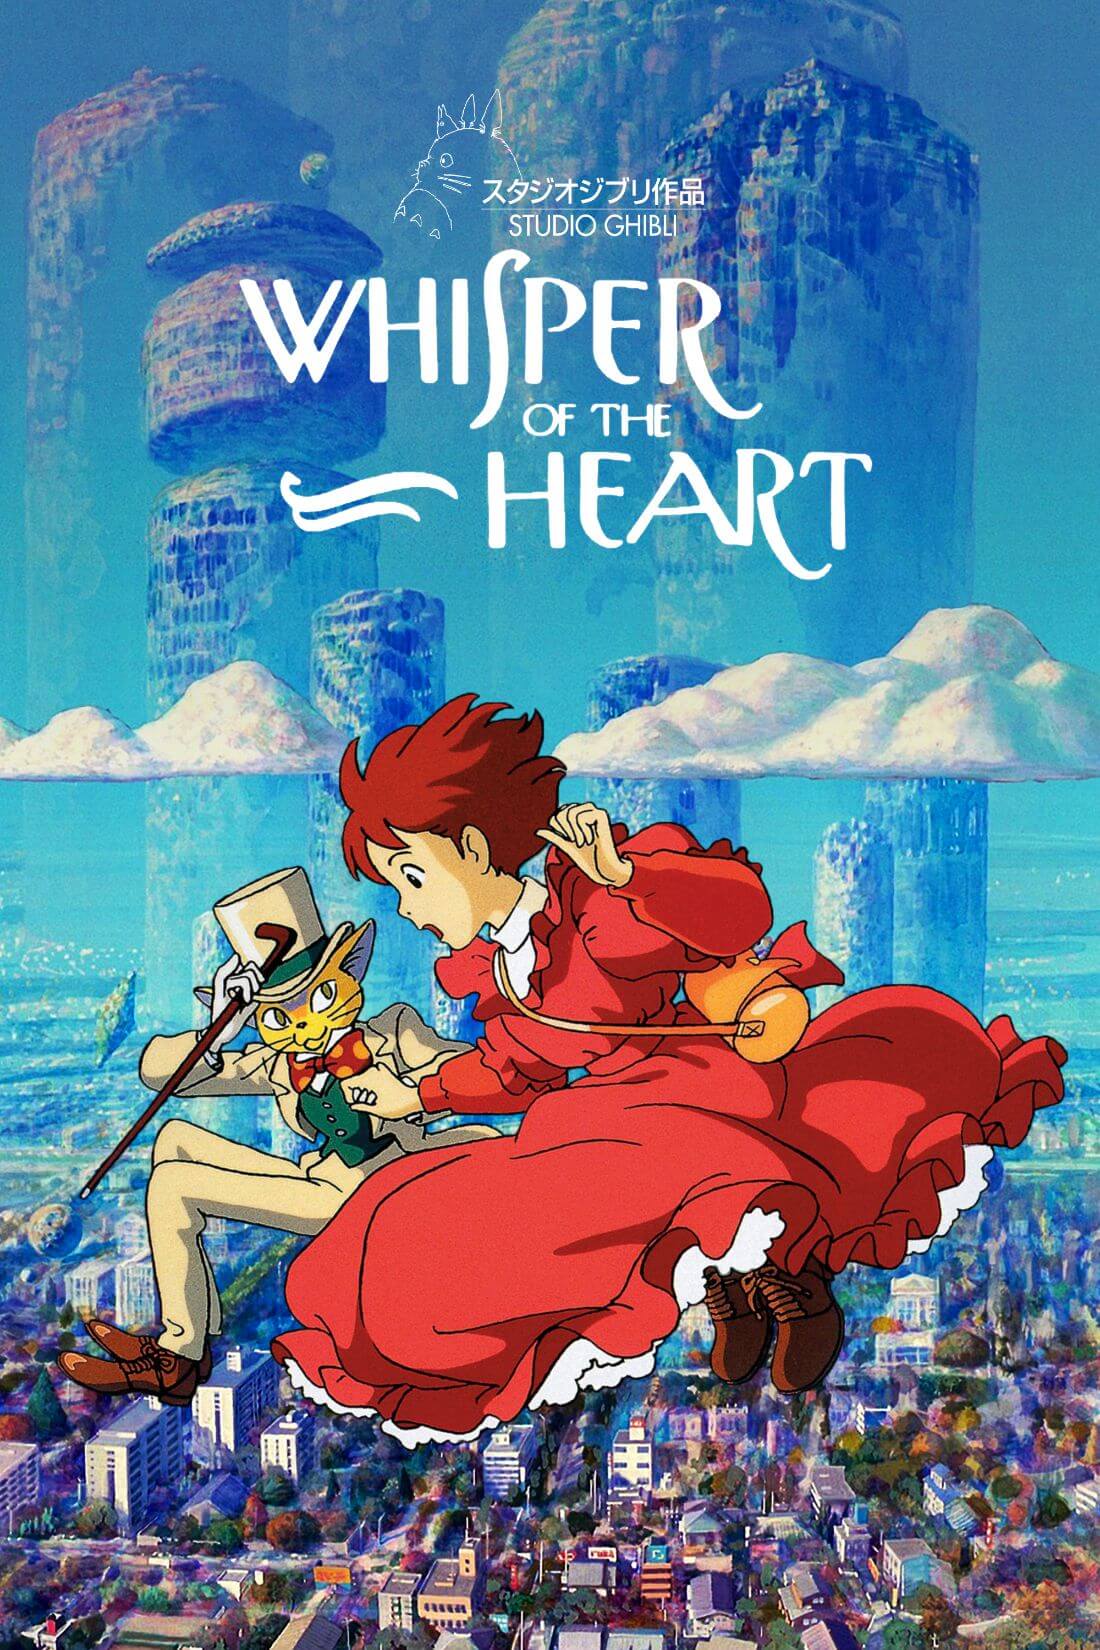 Whisper Of The Heart - Studio Ghibli Japanaese Animated Movie Poster -  Posters by Studio Ghibli, Buy Posters, Frames, Canvas & Digital Art Prints